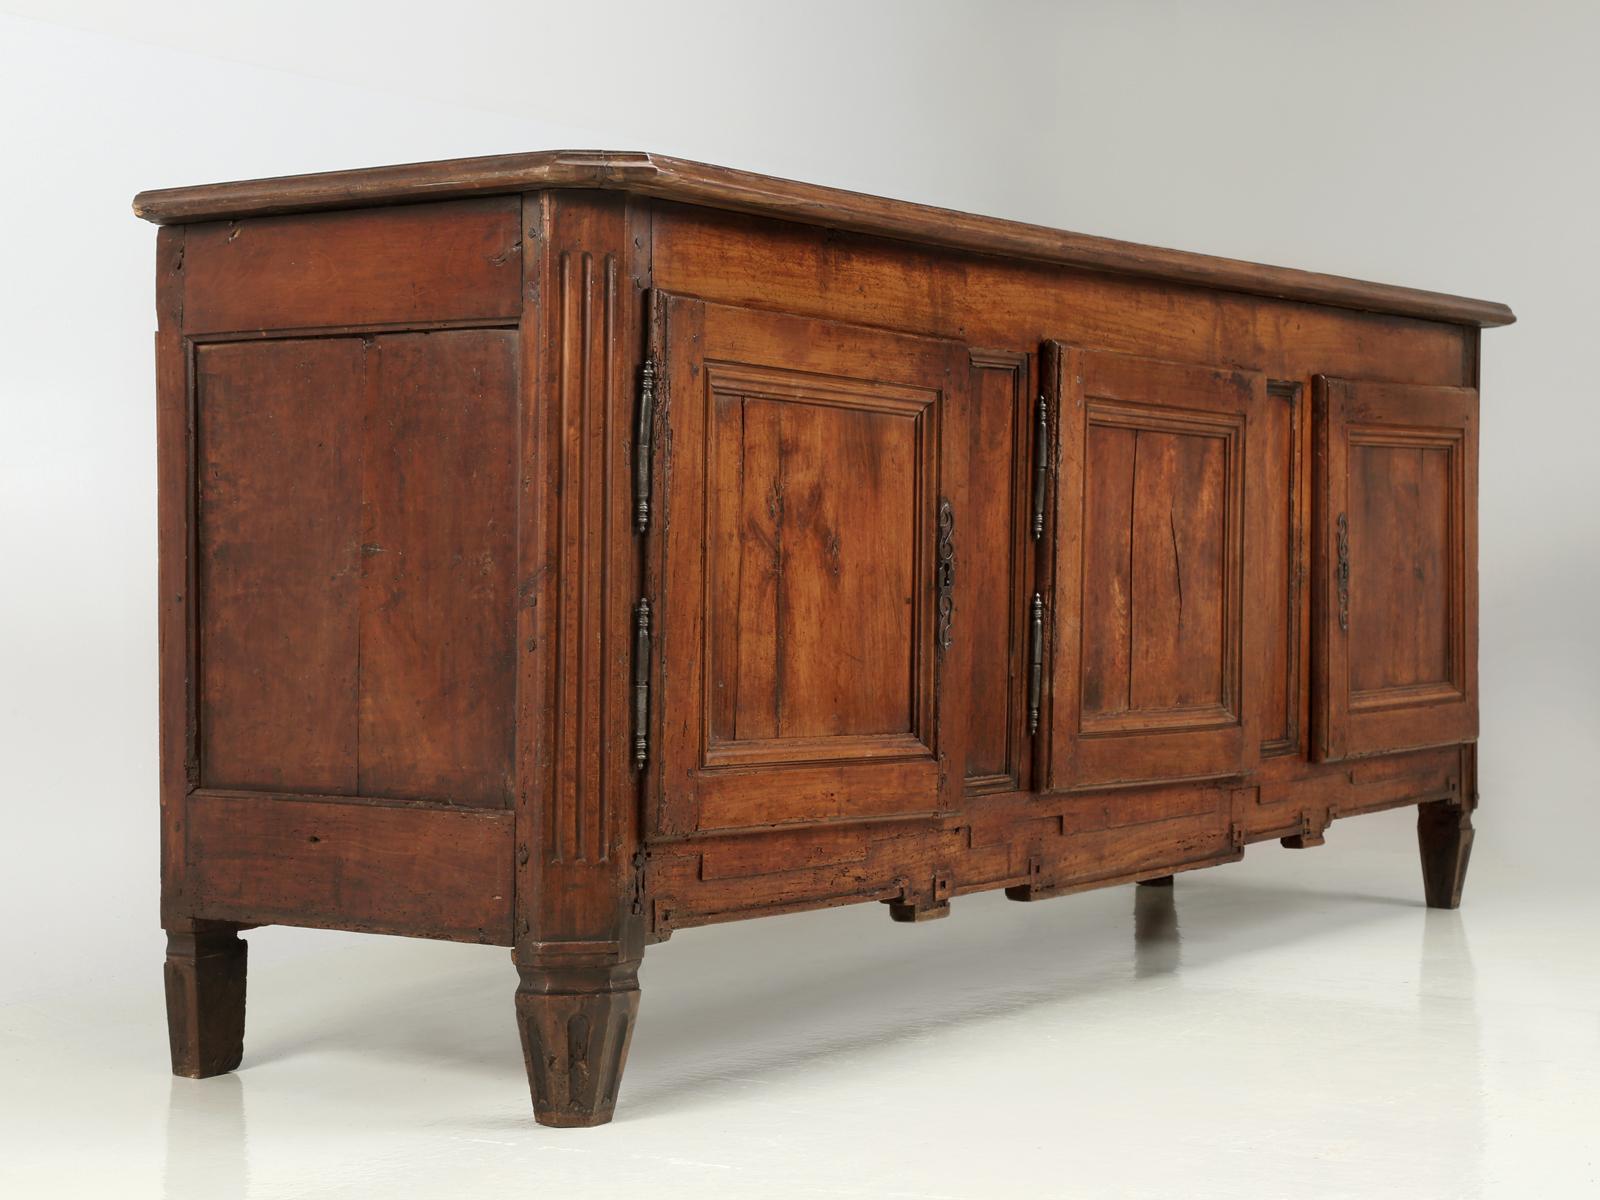 We have been importing antique French furniture or in this case, an antique French buffet for almost 30-years and this style is a new one on us. Judging by the construction methods used and all the hand-sawn lumber, it is our opinion that this